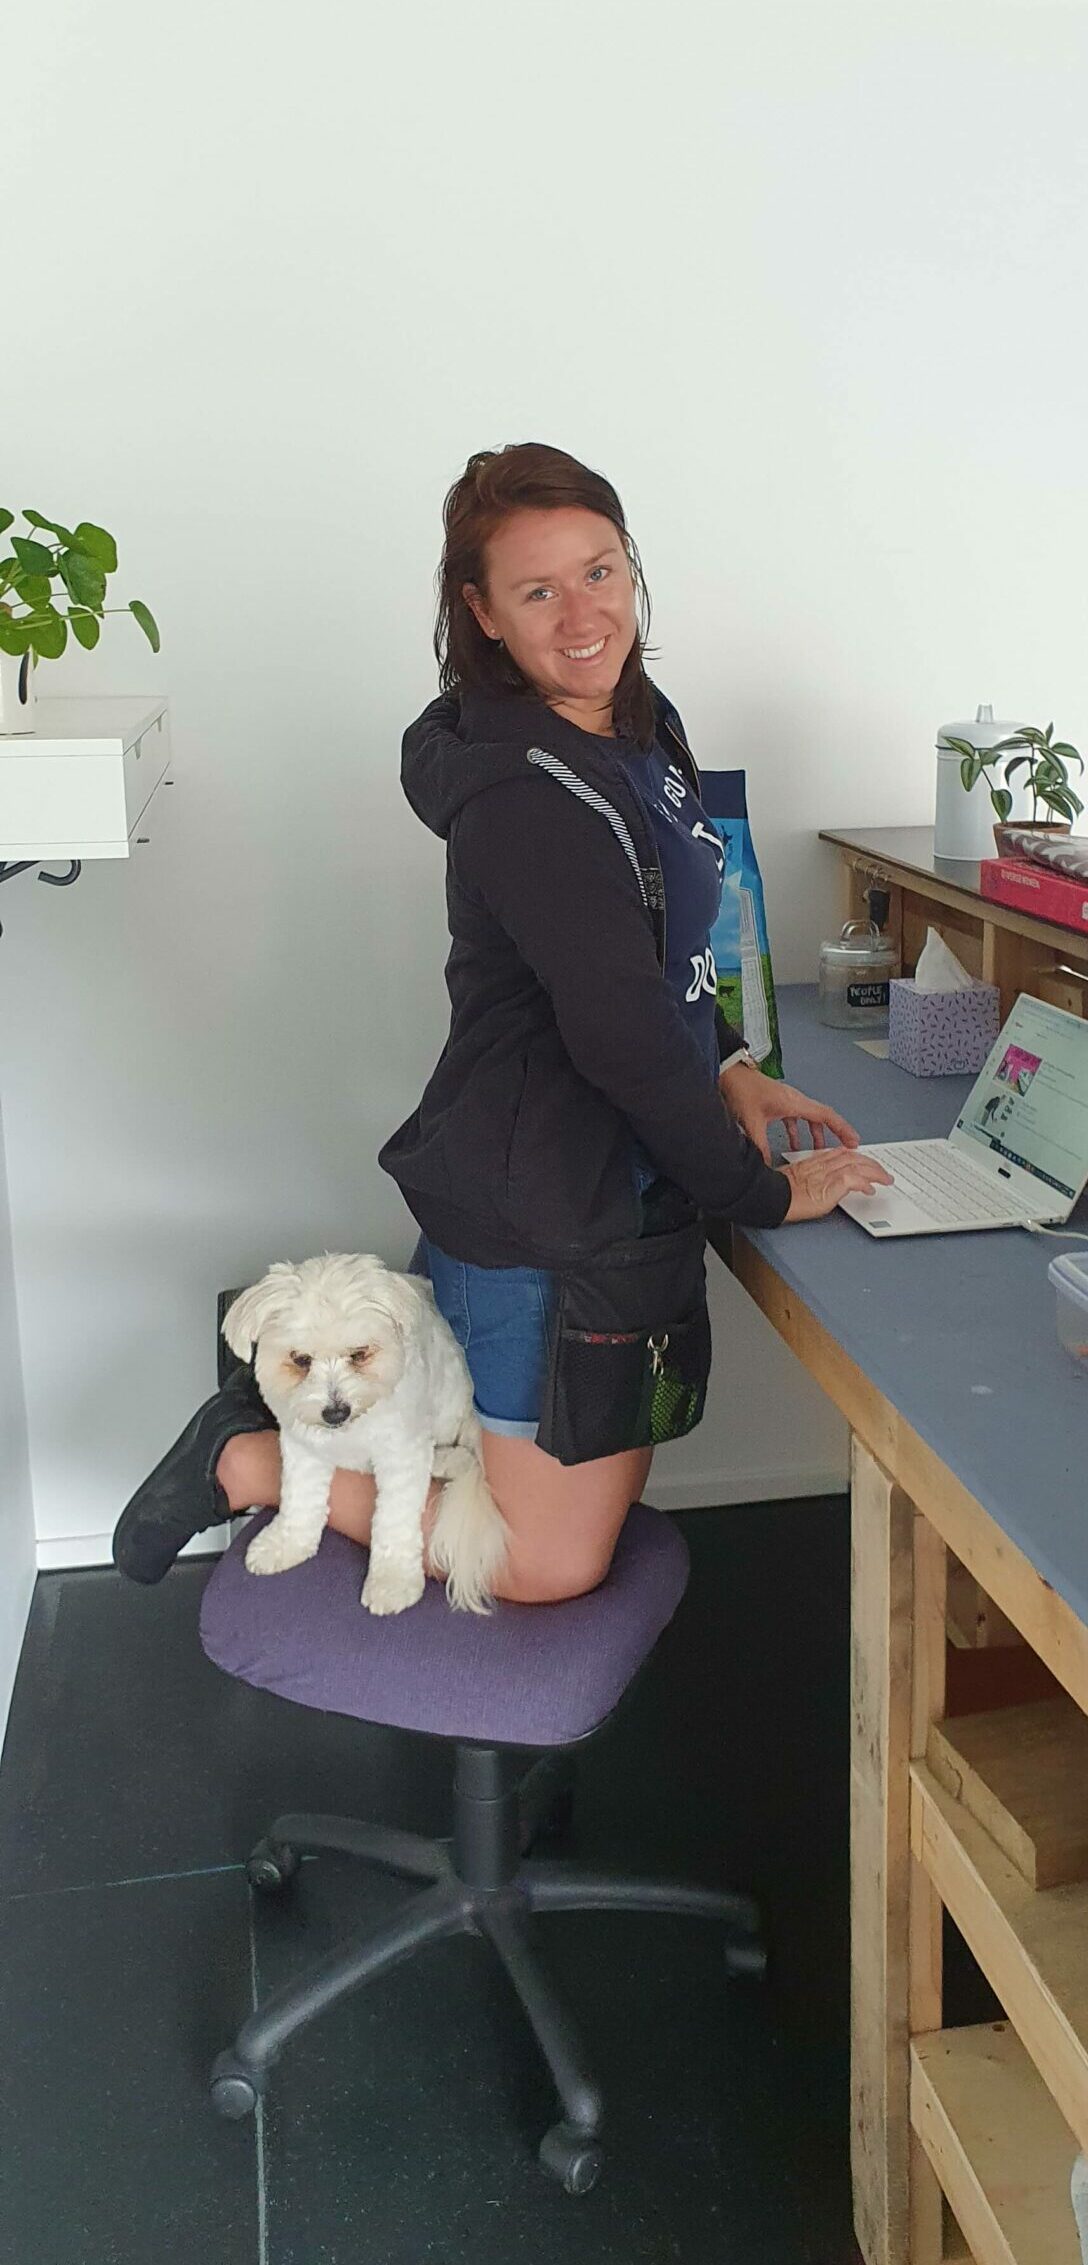 Human and dog on reception chair